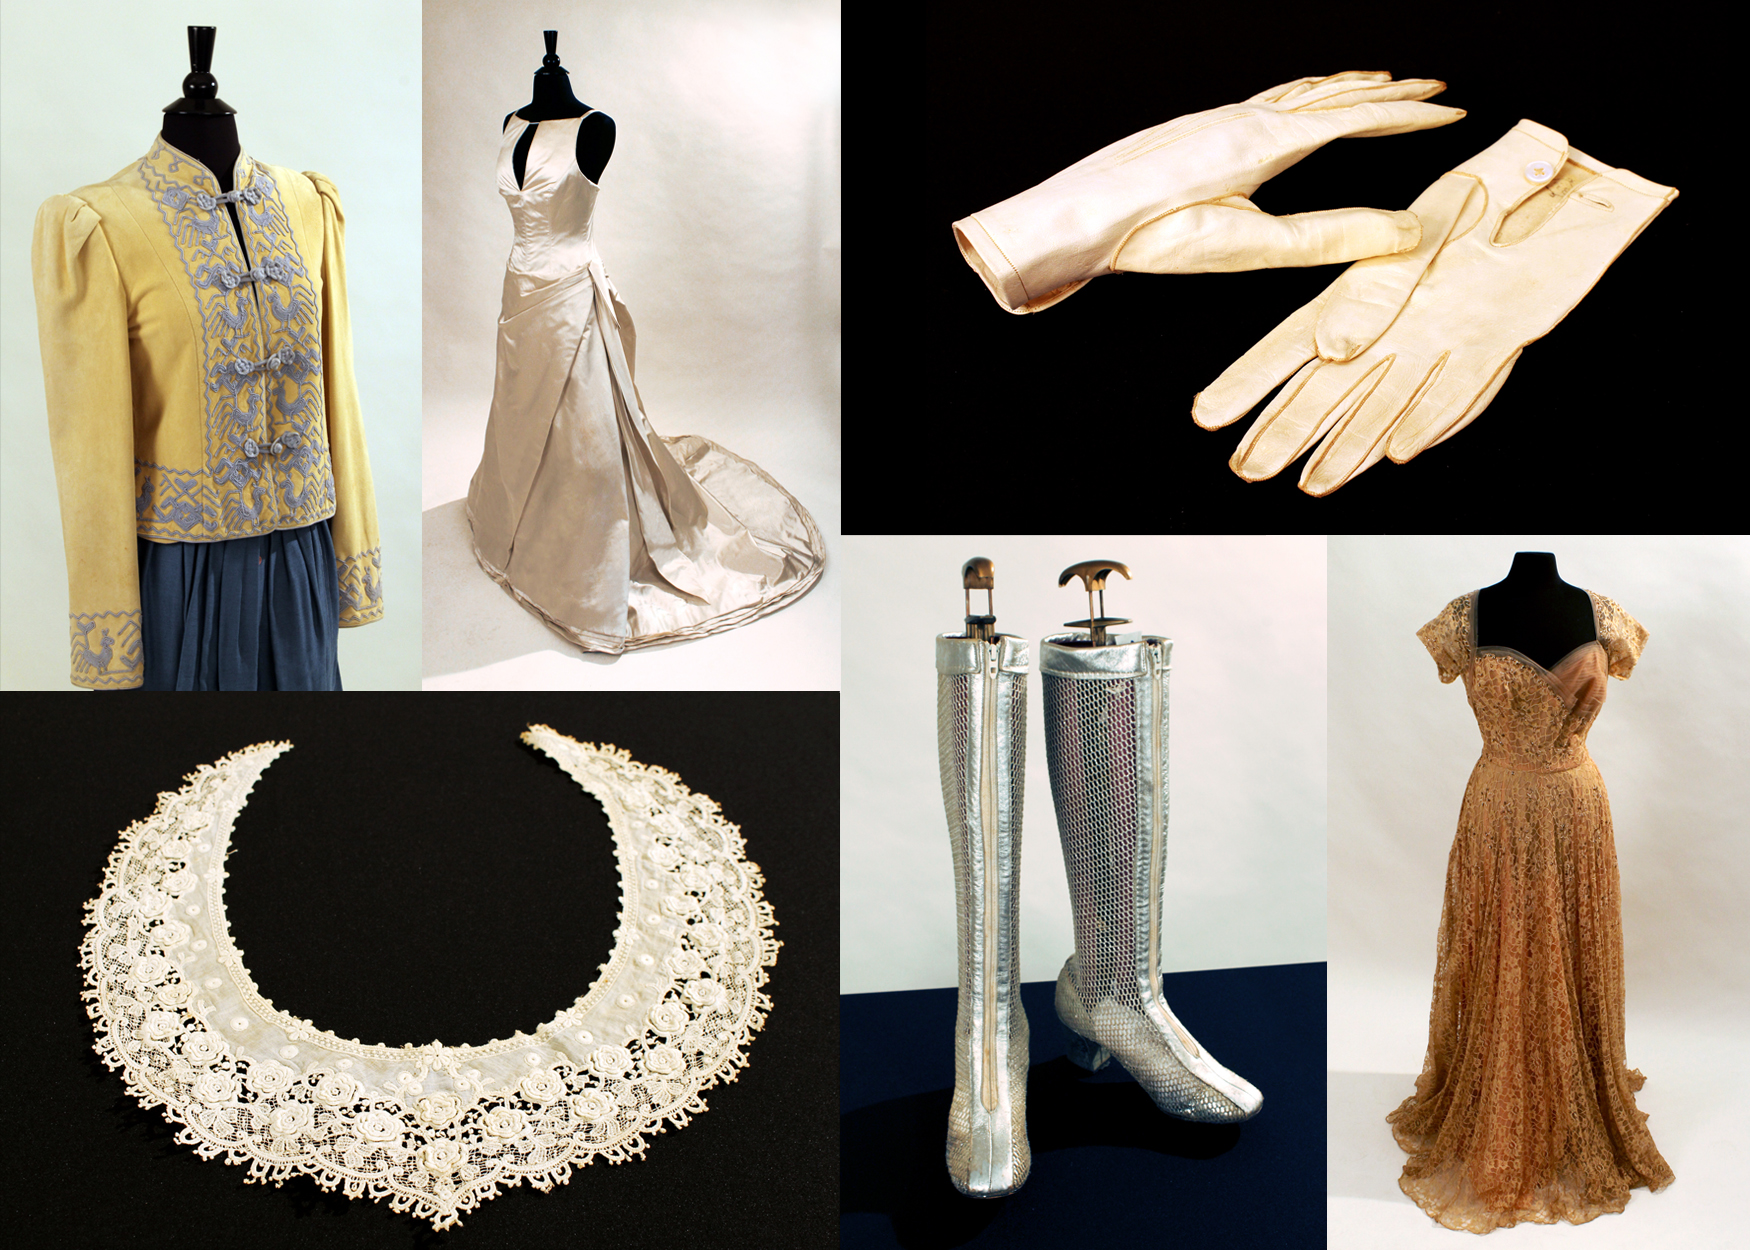 An elaborately beaded bodice from the 1890s, lace from the early 1900s, a pair of "space age" boots from the 1960s, and items by luxury design labels such as Vera Wang, Chanel and Yves Saint Laurent are among the more than 26 pieces that will be available for viewing at the 'Fashion A to Z' exhibit.